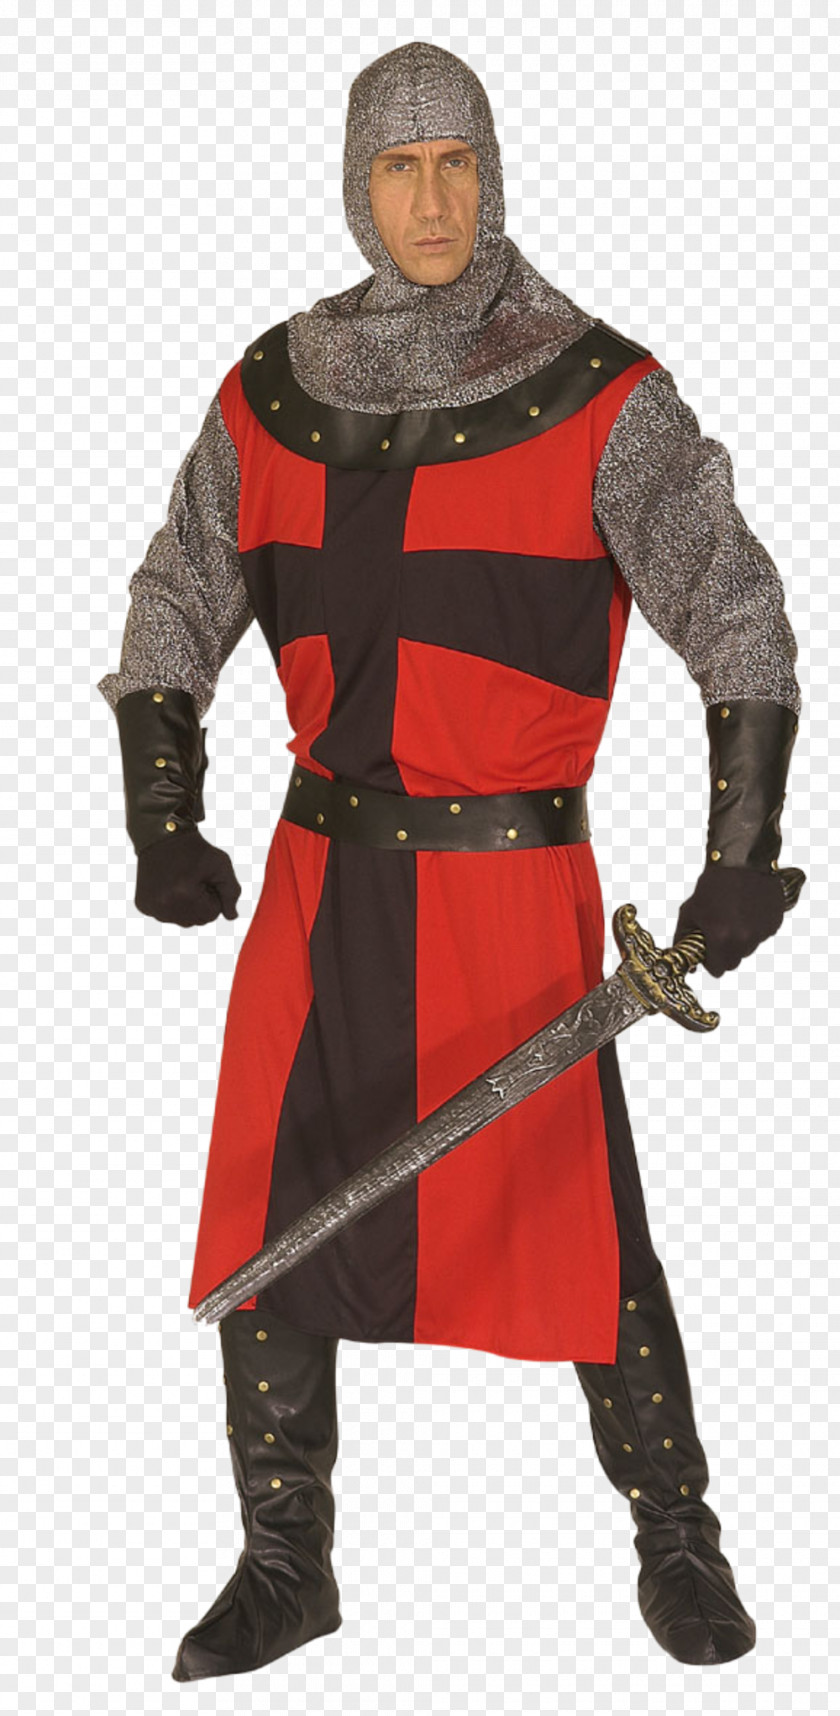 Medival Knight Middle Ages Costume Party Dress PNG